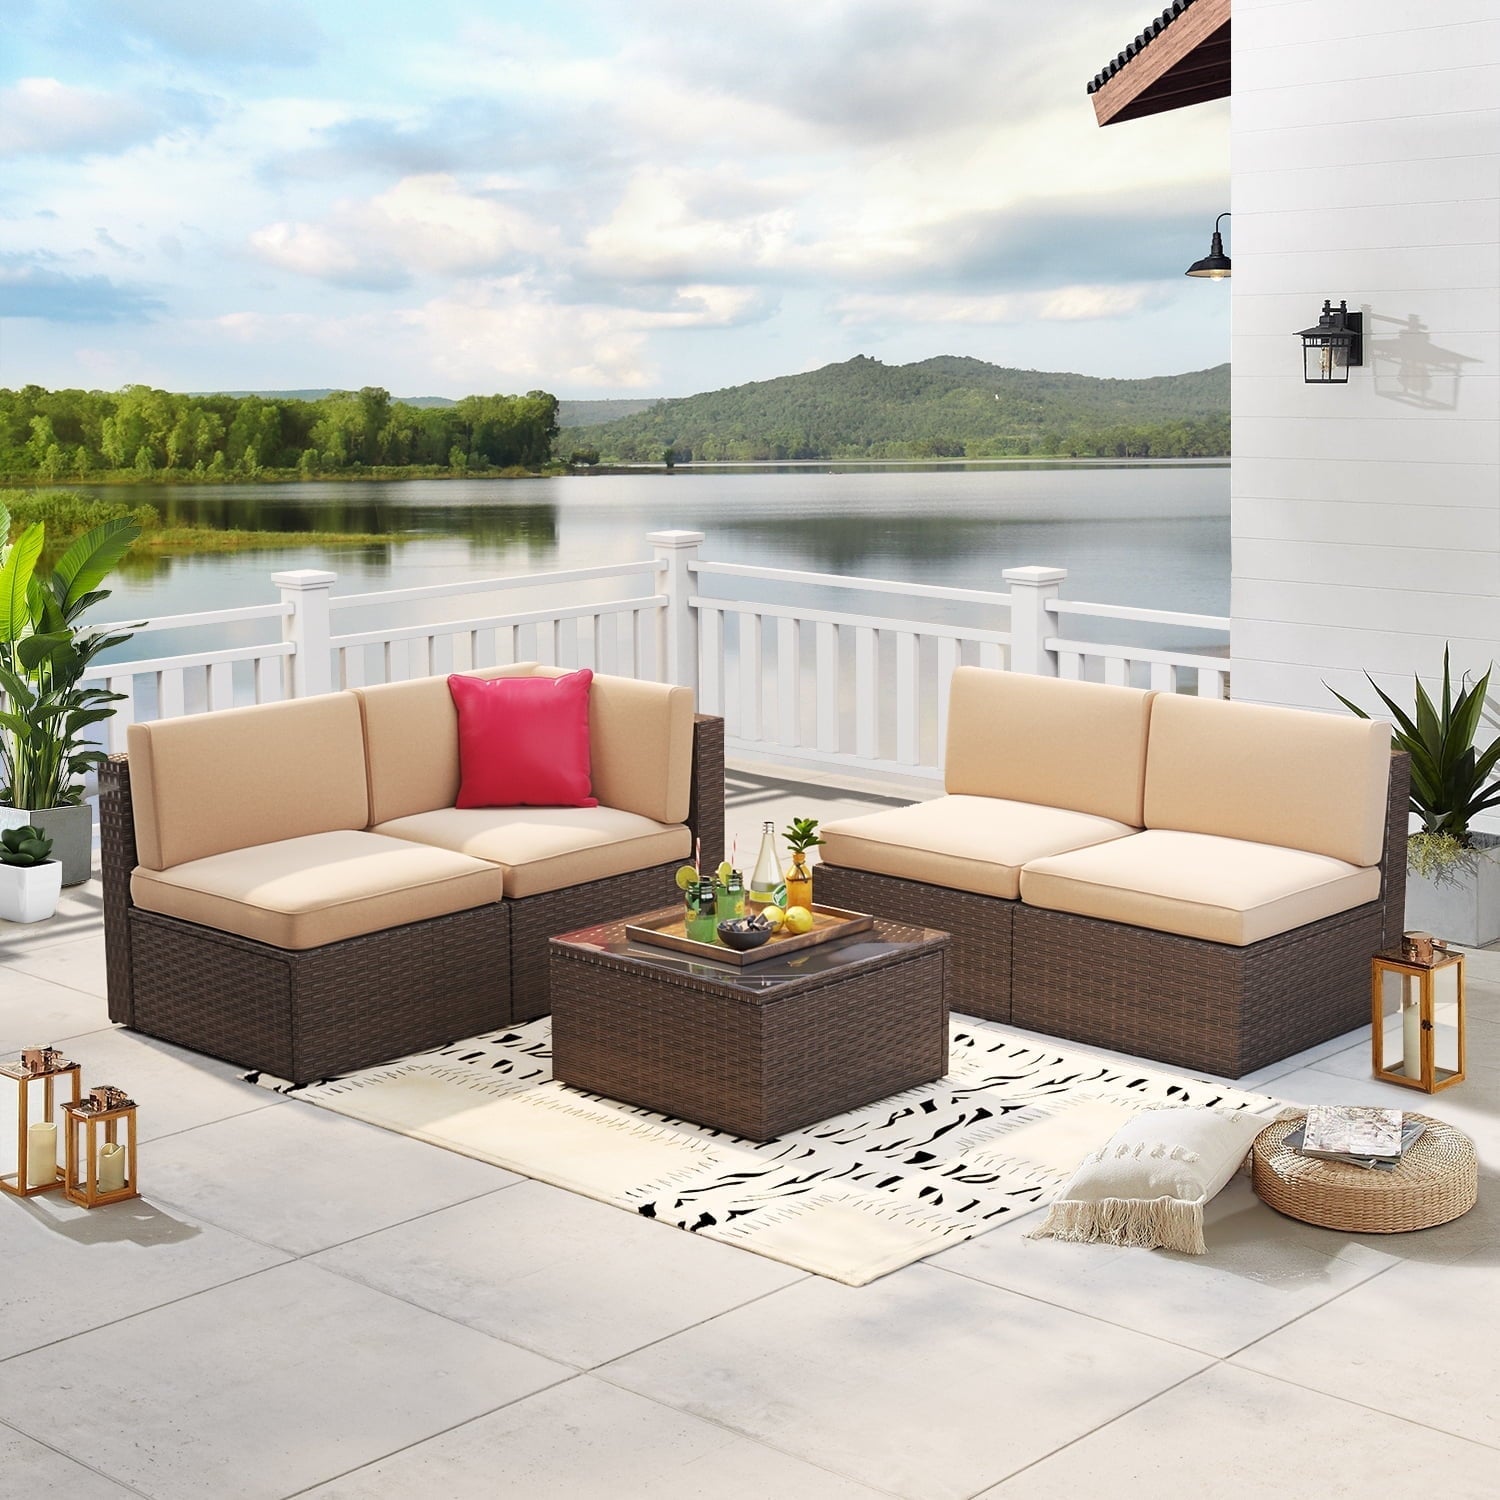 5 Piece Outdoor Patio Conversation Set Outdoor Furniture Sectional Wicker Sofa Set with Beige Cushions